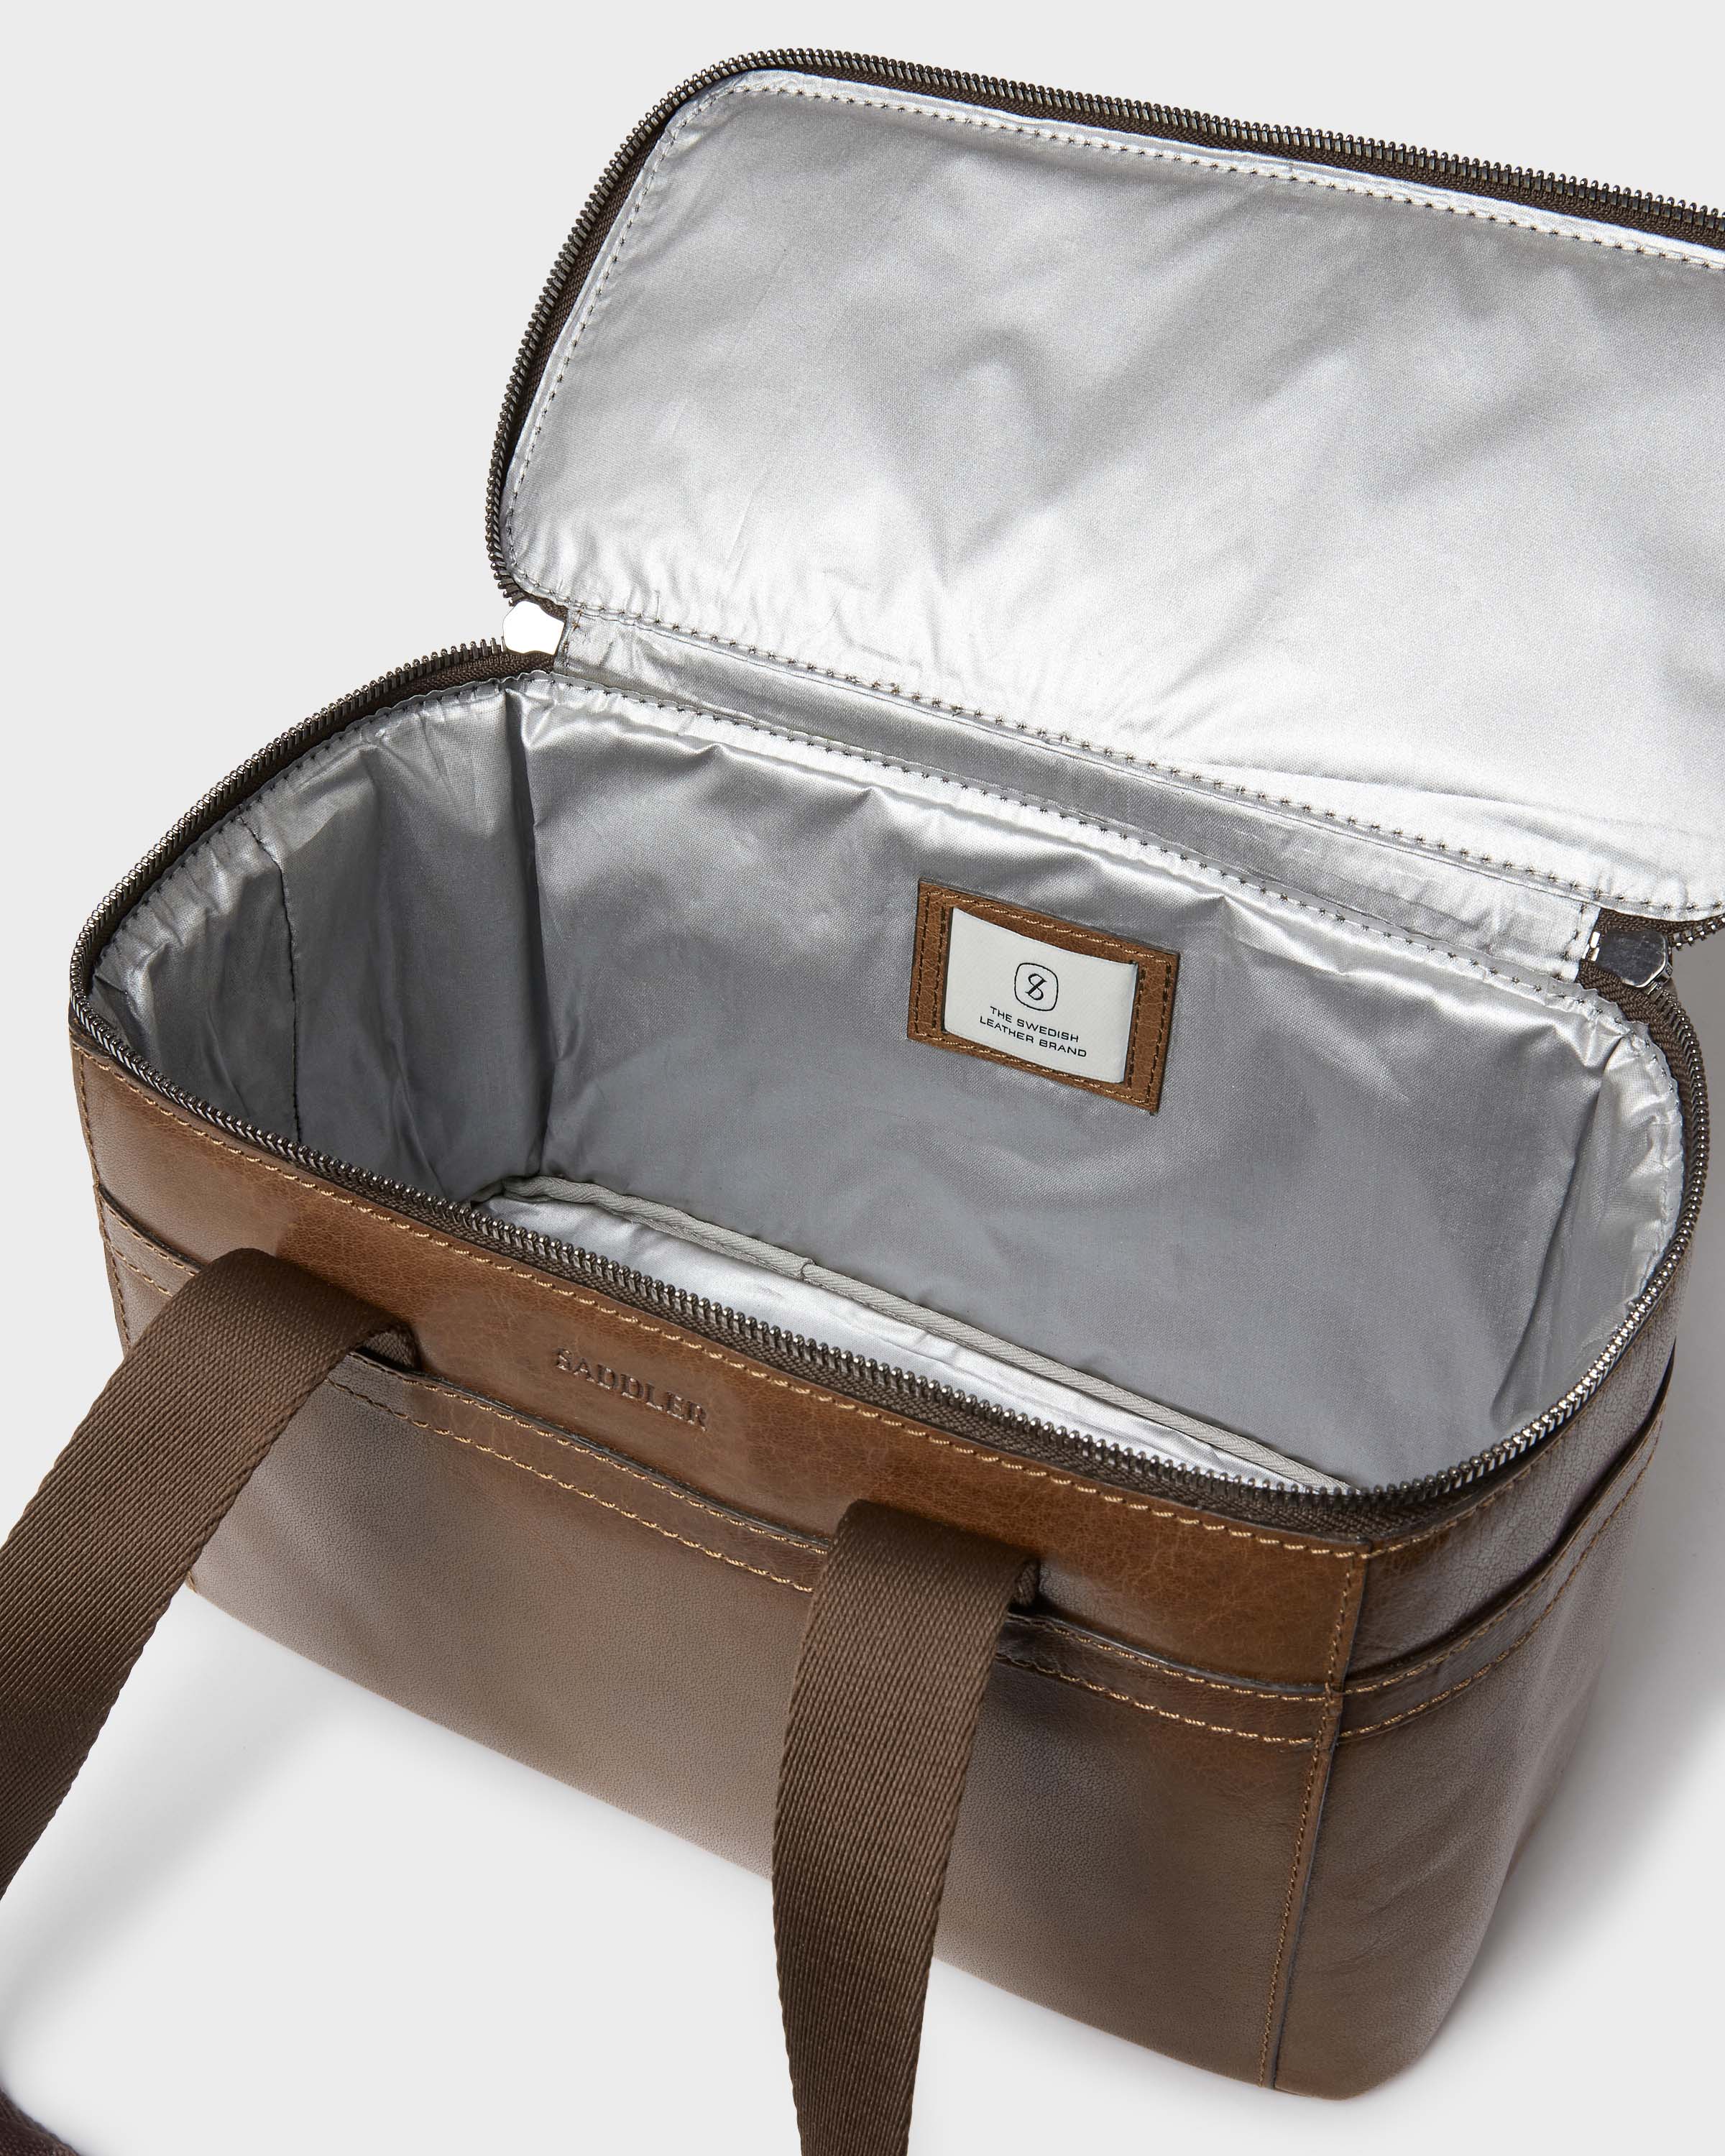 Buy Li cooler/lunch bag at  - The swedish leather brand